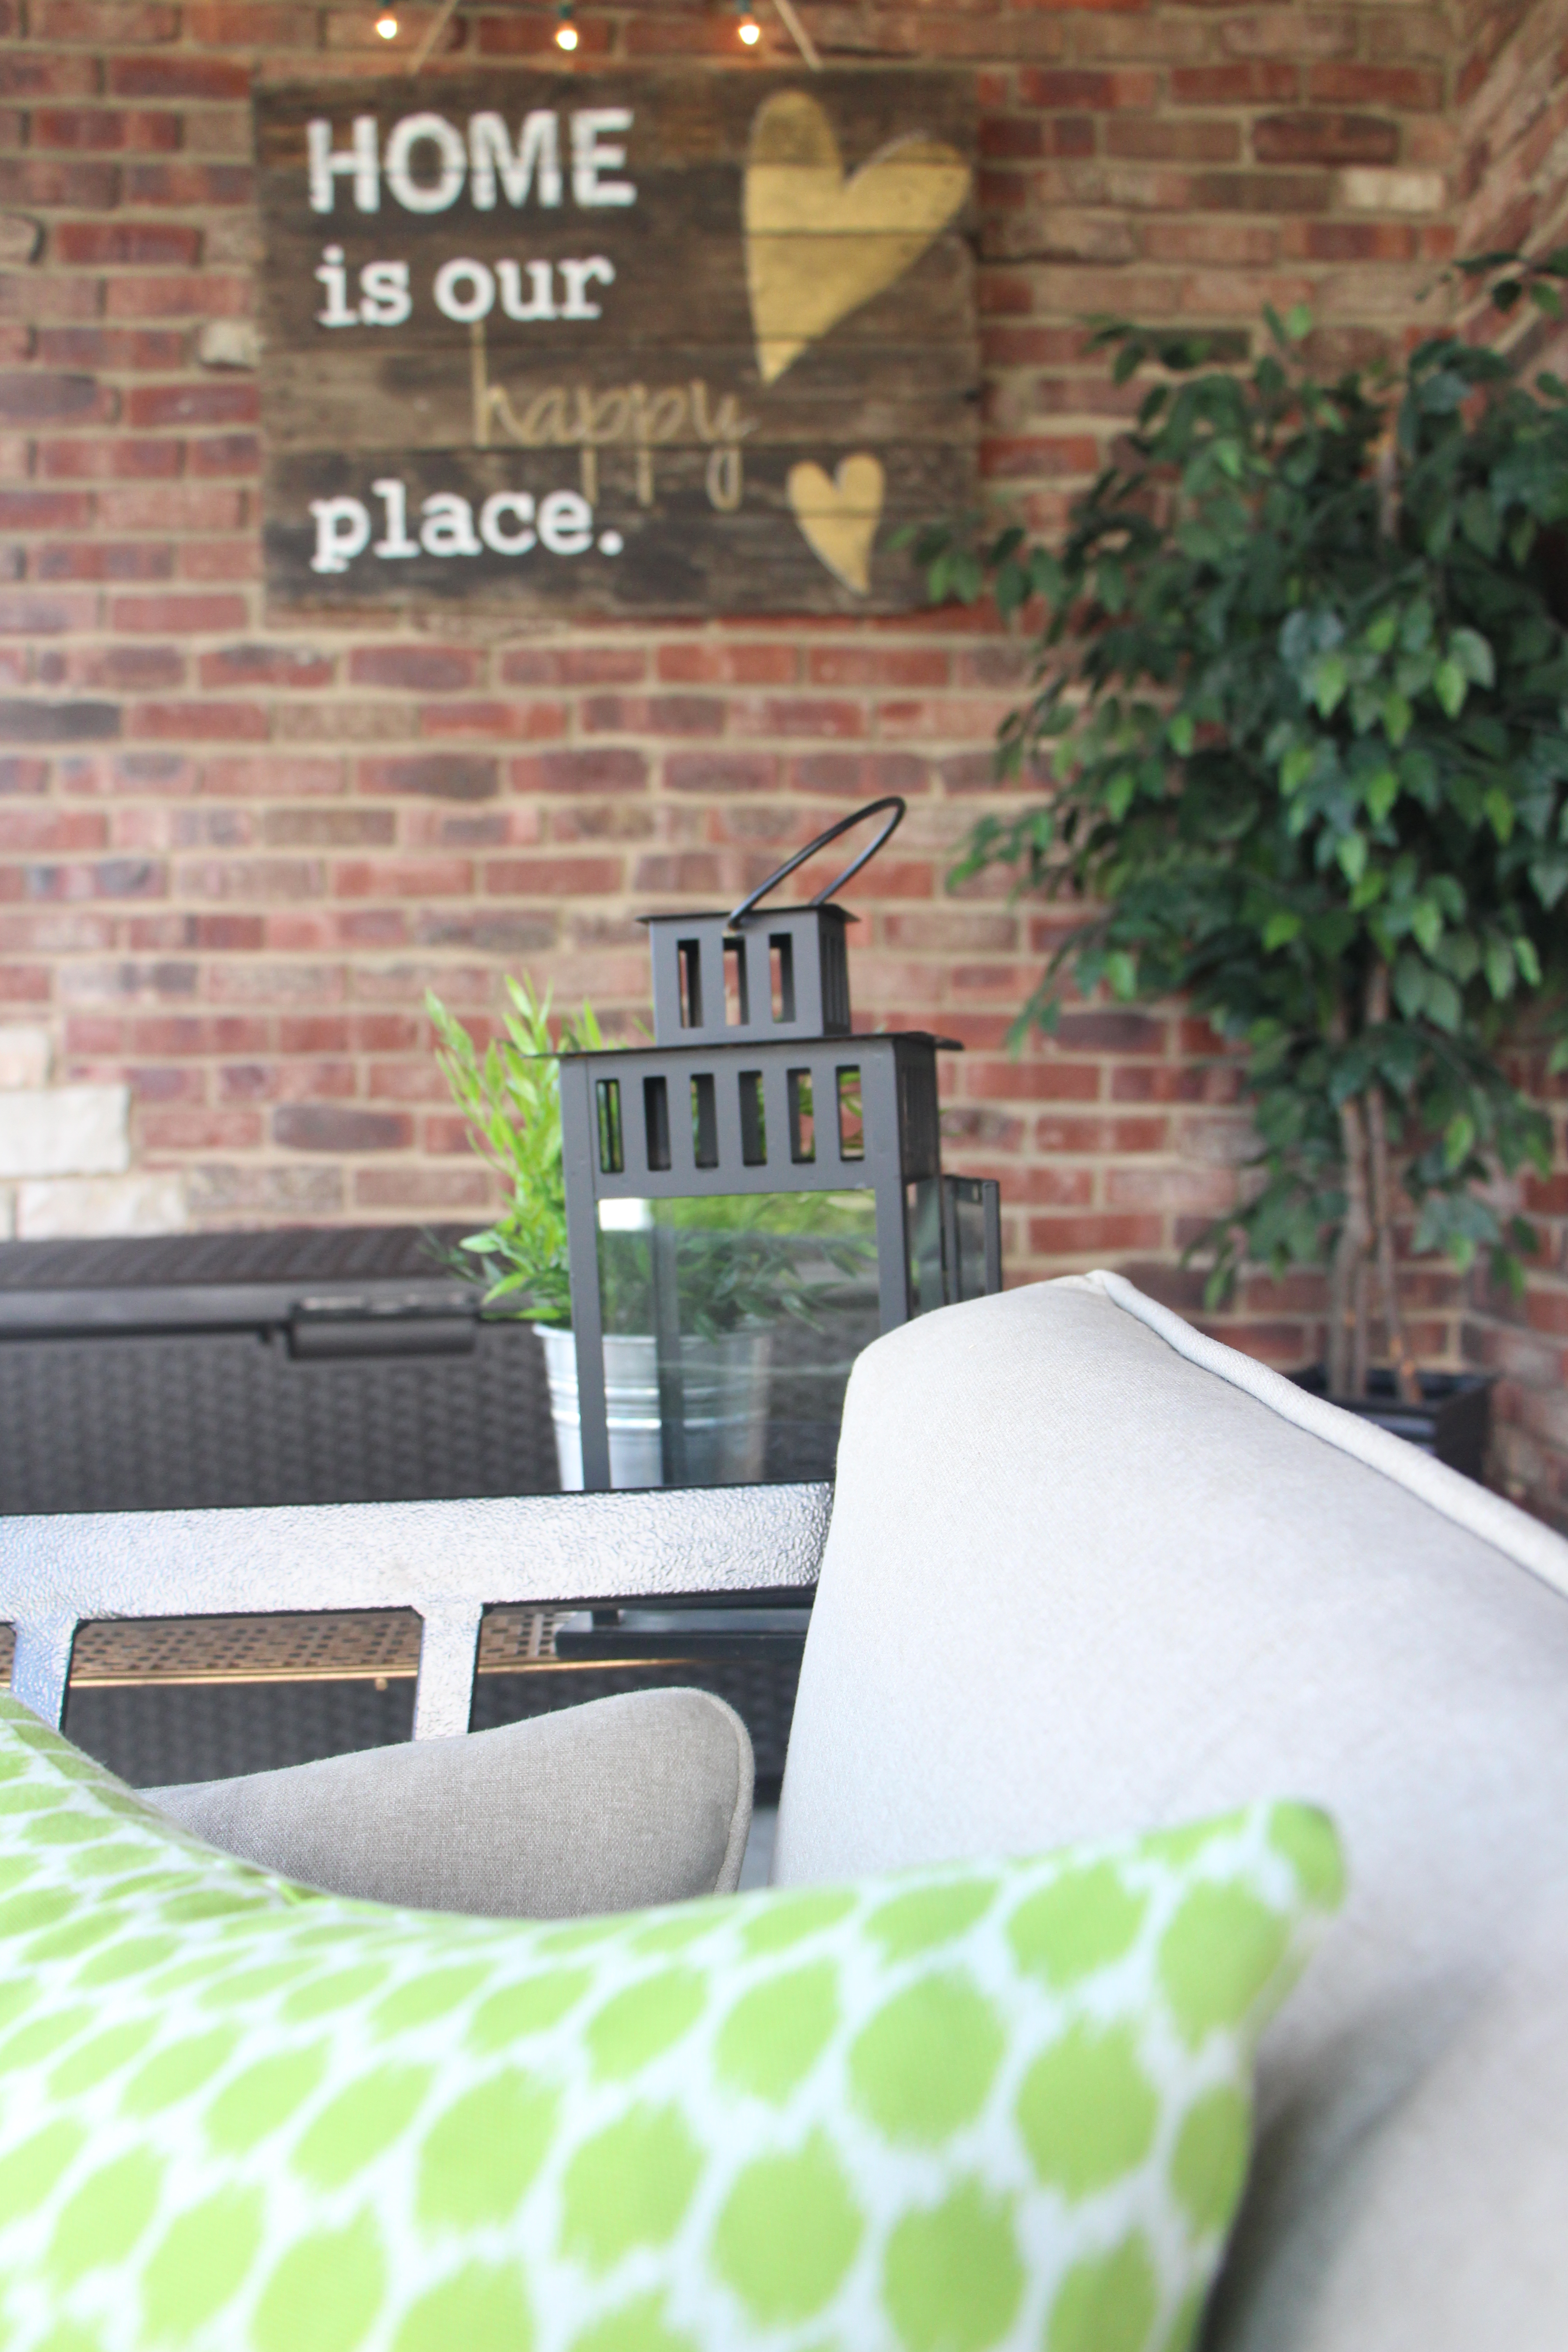 Outdoor curtains | outdoor oasis | backyard patio | This is our Bliss | DIY pallet sign